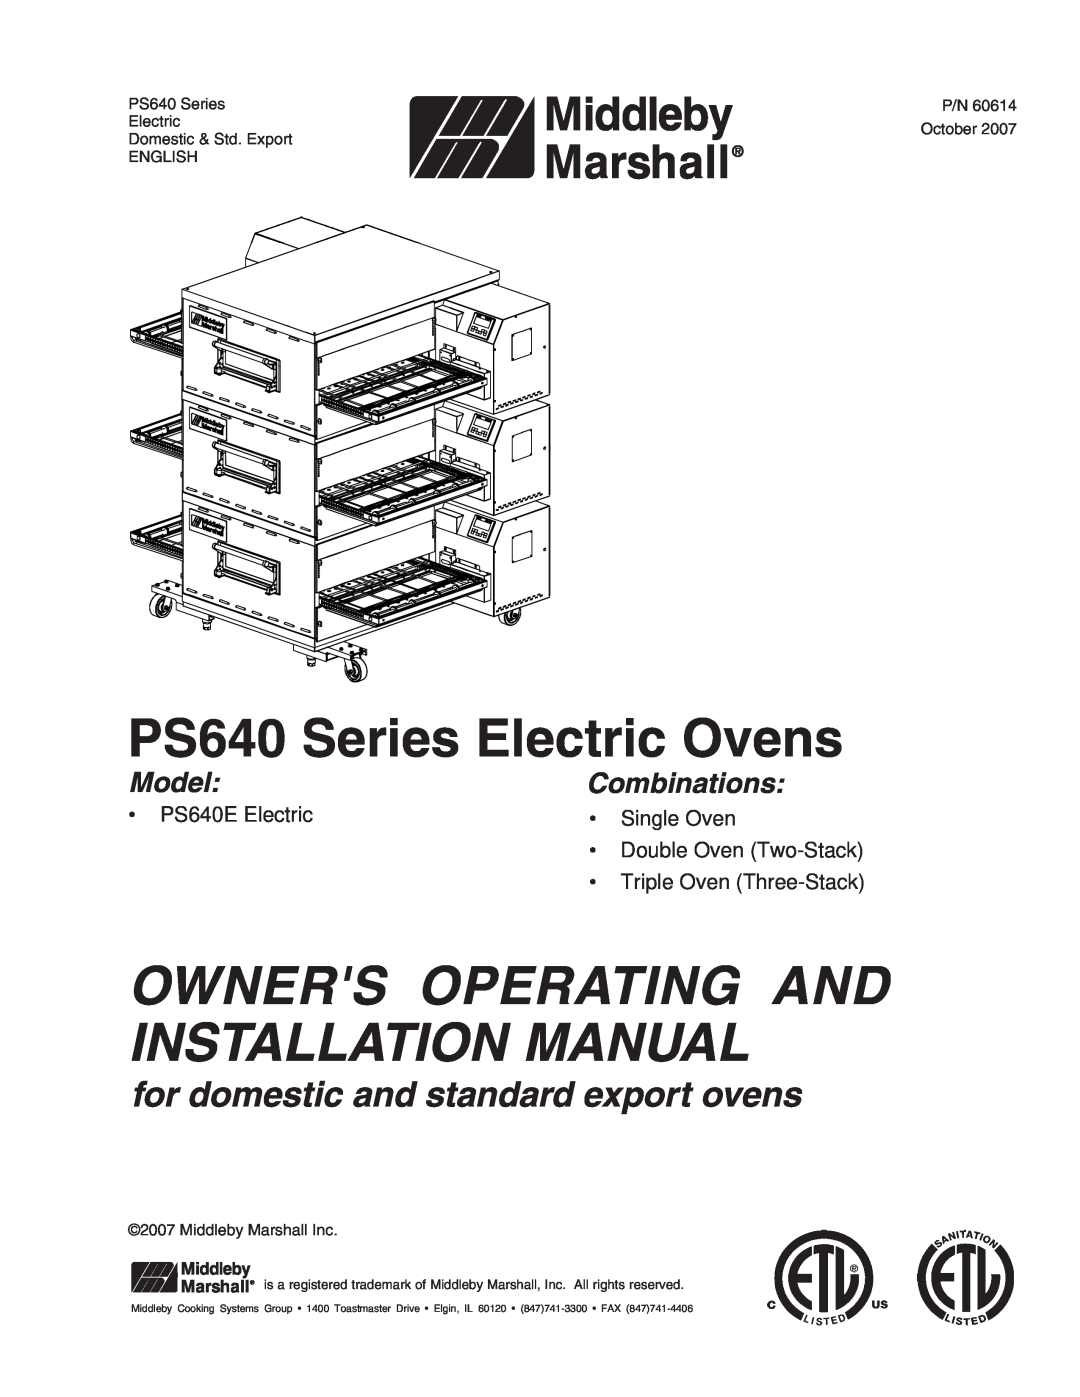 Middleby Marshall PS640E installation manual PS640 Series Electric Ovens, Owners Operating And Installation Manual, Model 